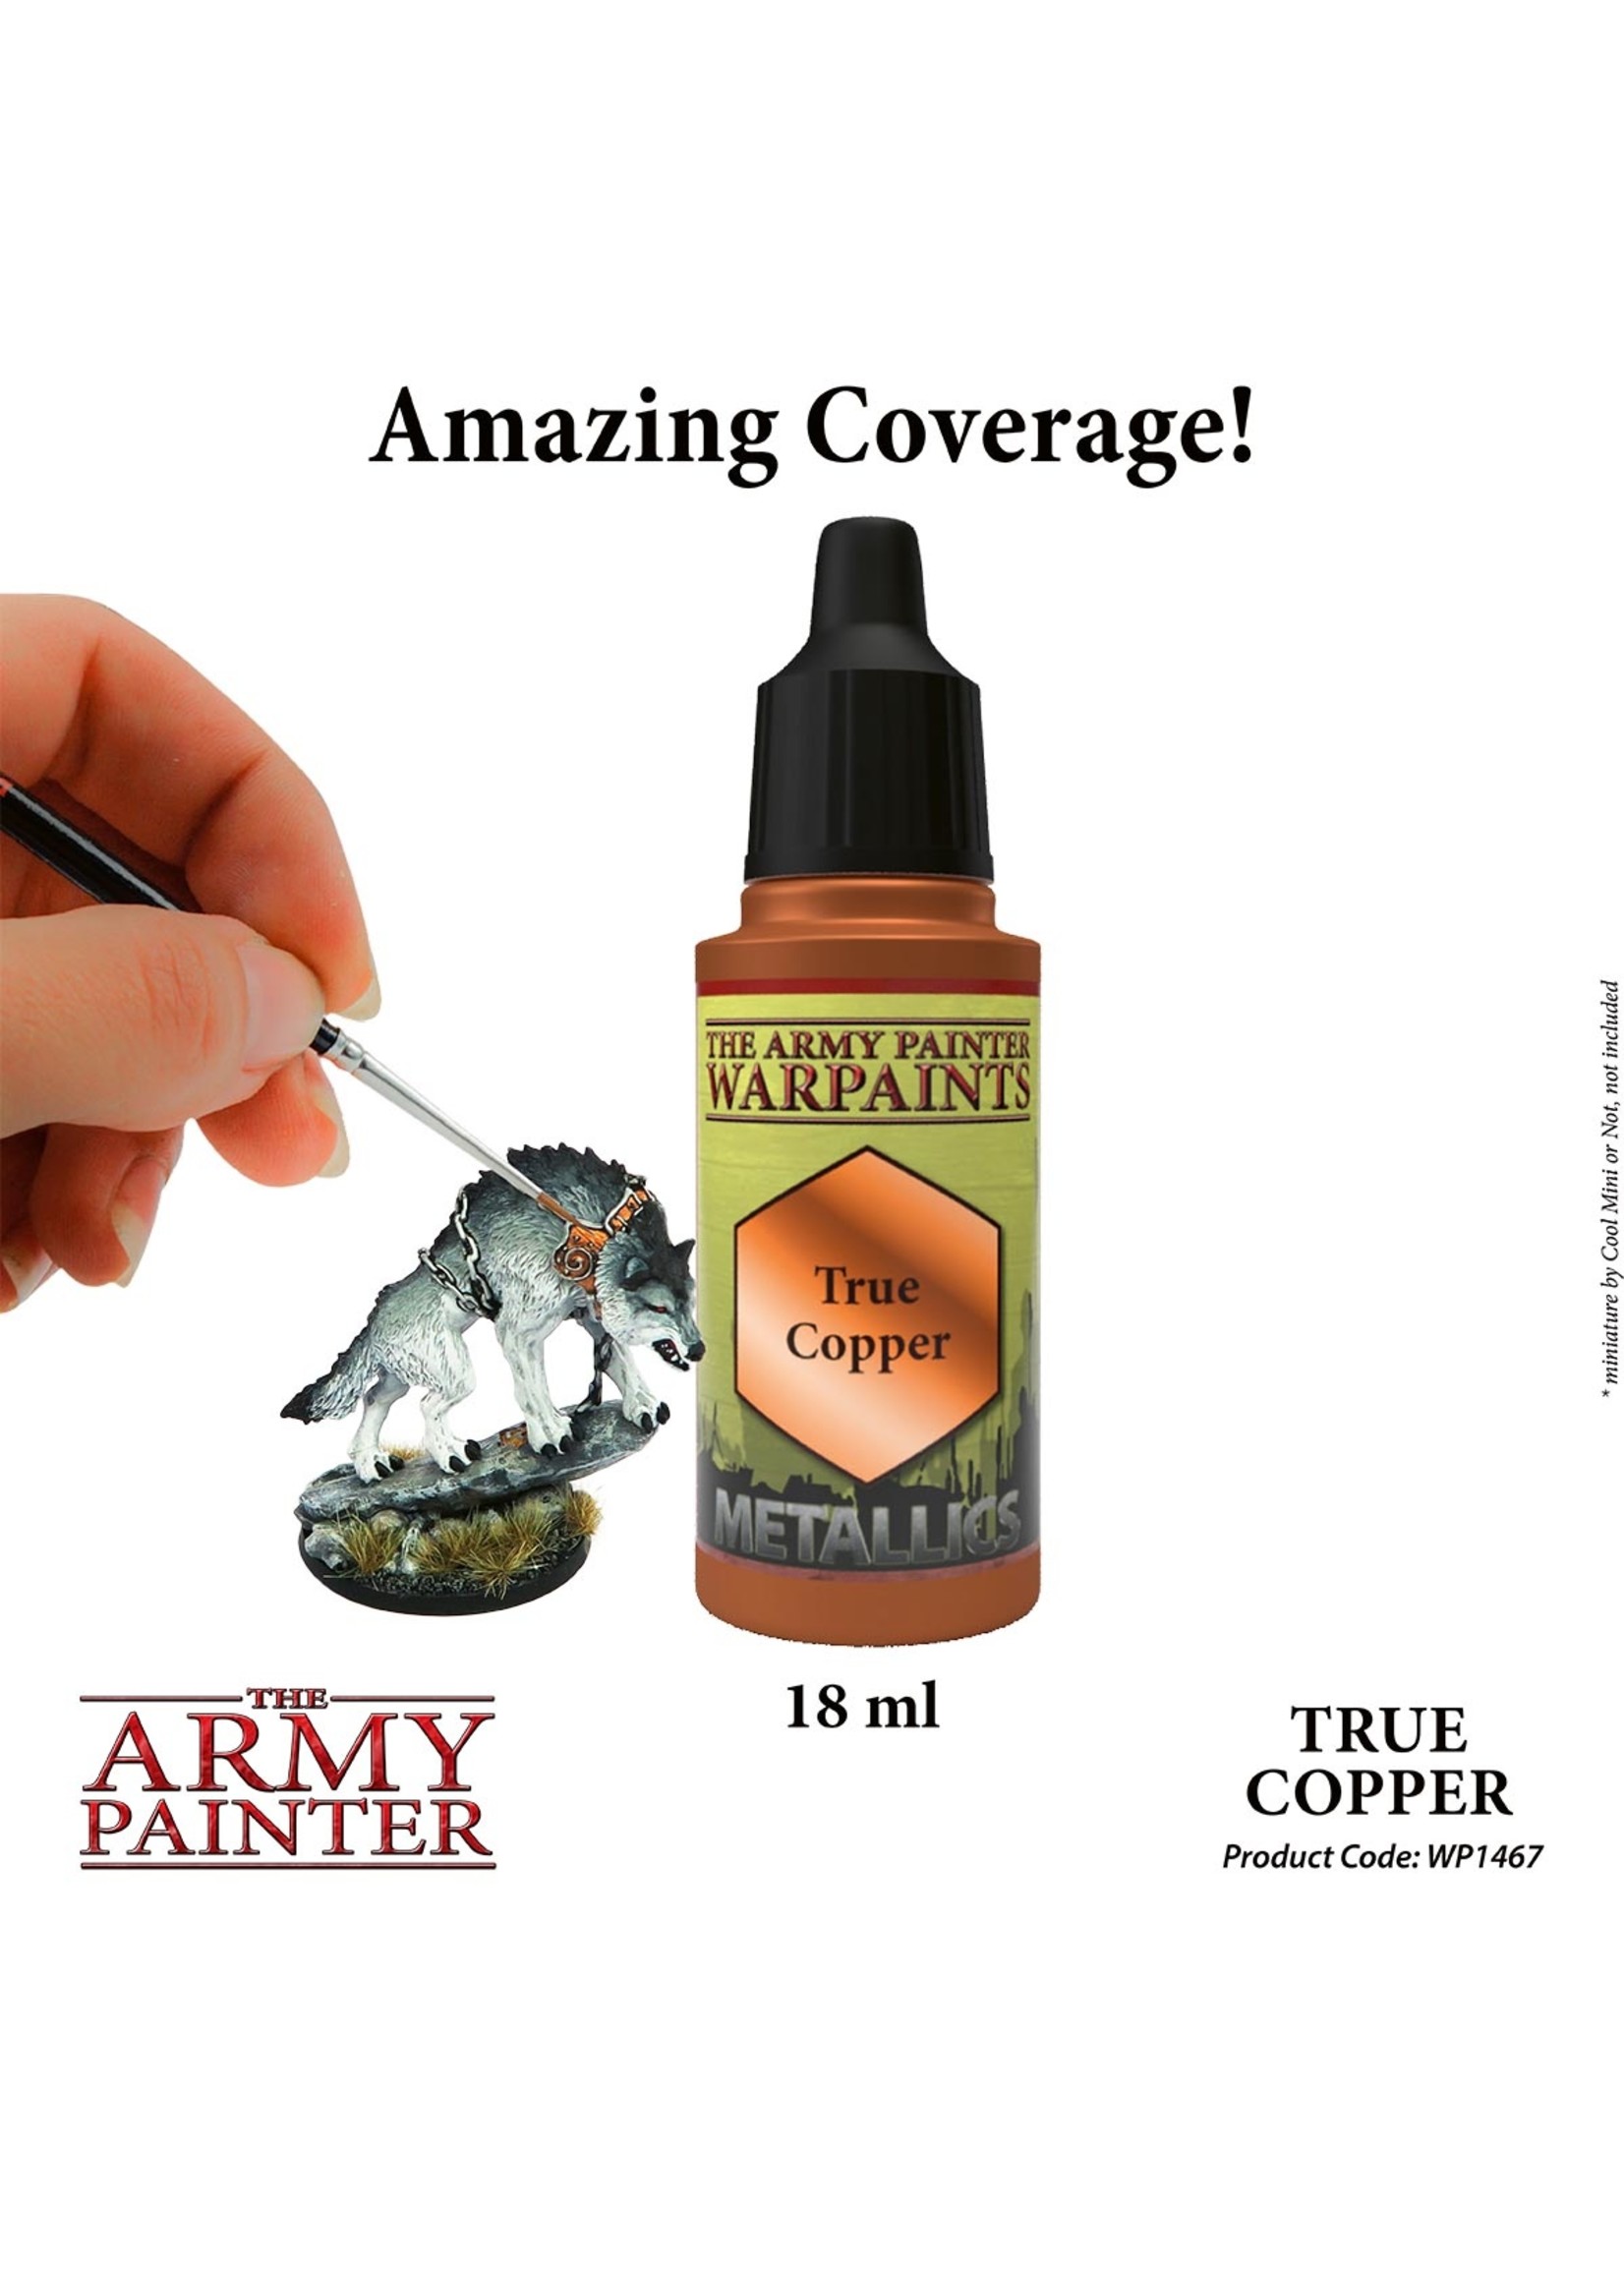 The Army Painter WP1467 - True Copper 18ml Metallic Paint